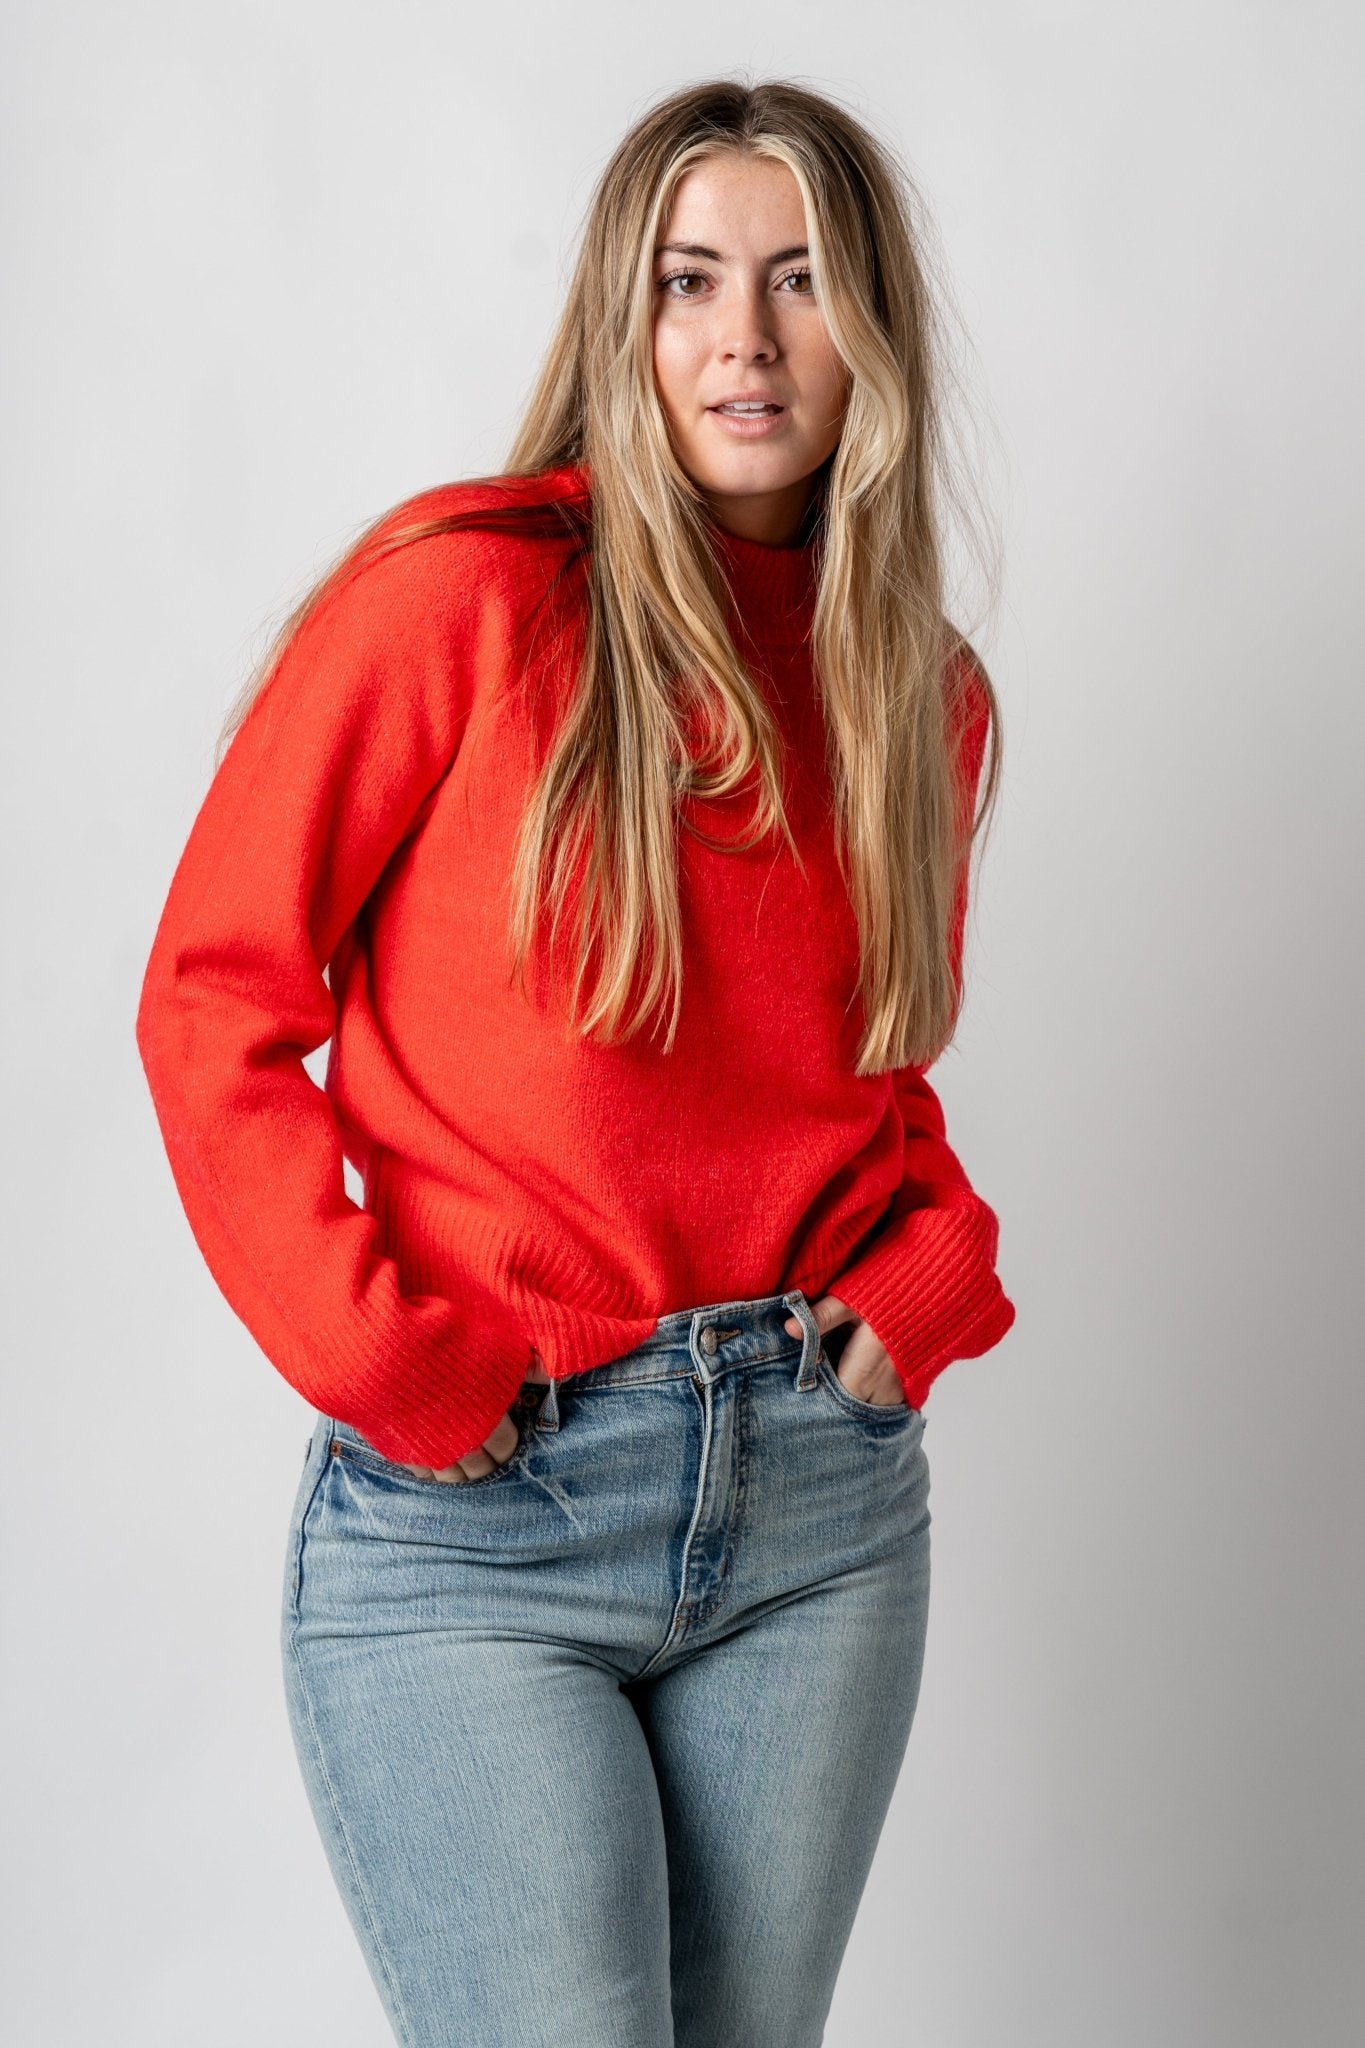 Mock neck sweater red – Stylish Sweaters | Boutique Sweaters at Lush Fashion Lounge Boutique in Oklahoma City